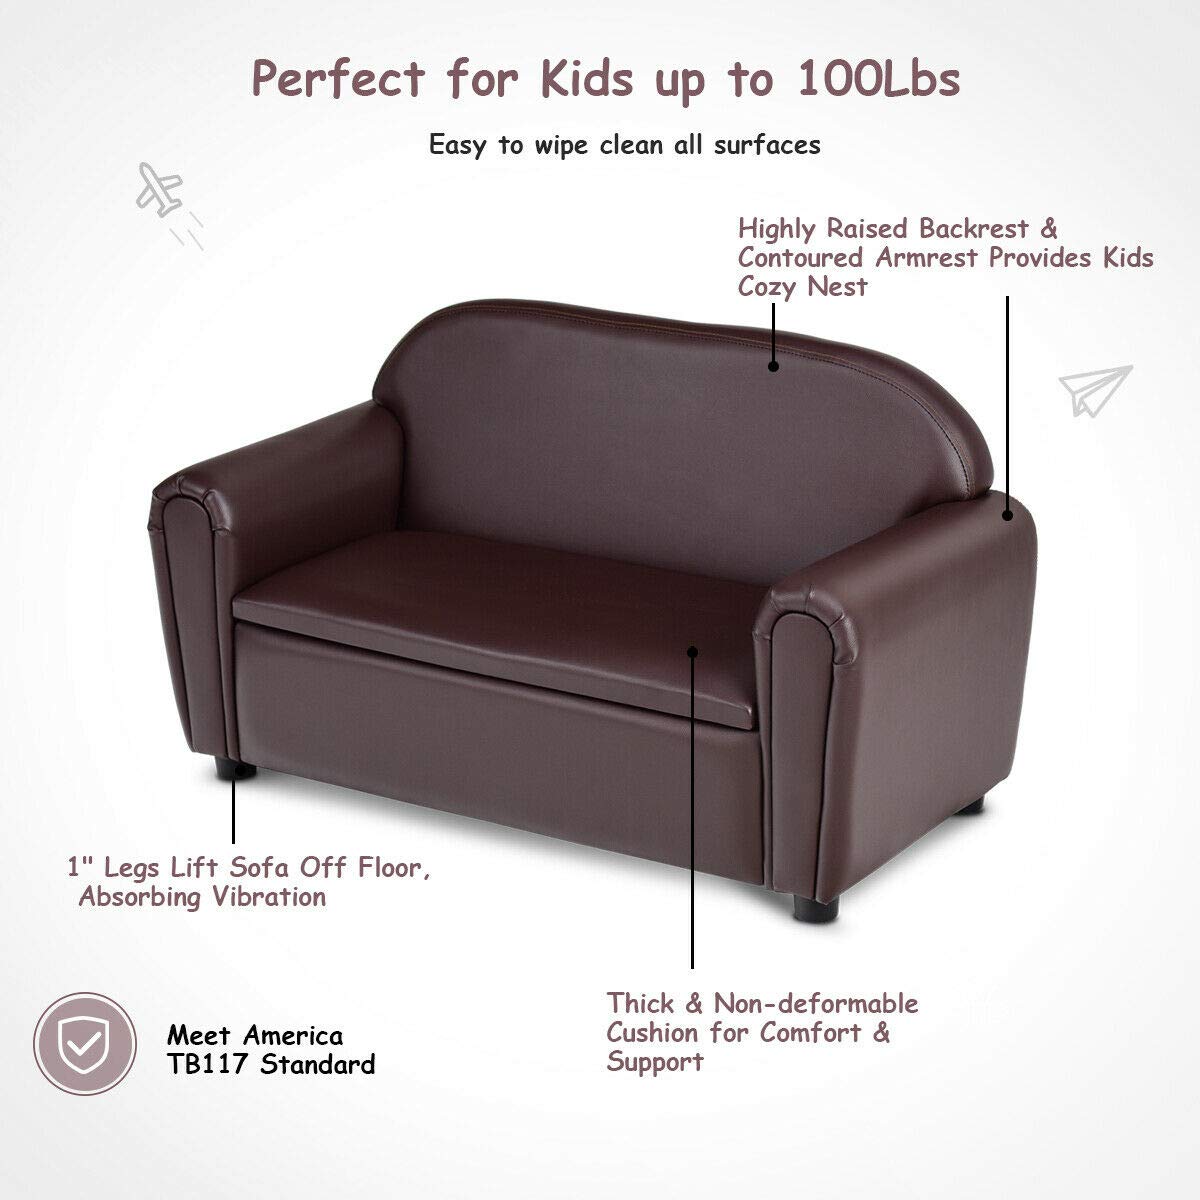 HONEY JOY Kids Sofa, 2 Seat Touch Couch Lounger Chair with Flip-Top Toy Storage Box, Children Comfy Loveseat Sofa Bed for Playroom Daycare Furniture, Mini Double Foam Play Couch for Boys Girls (Brown)